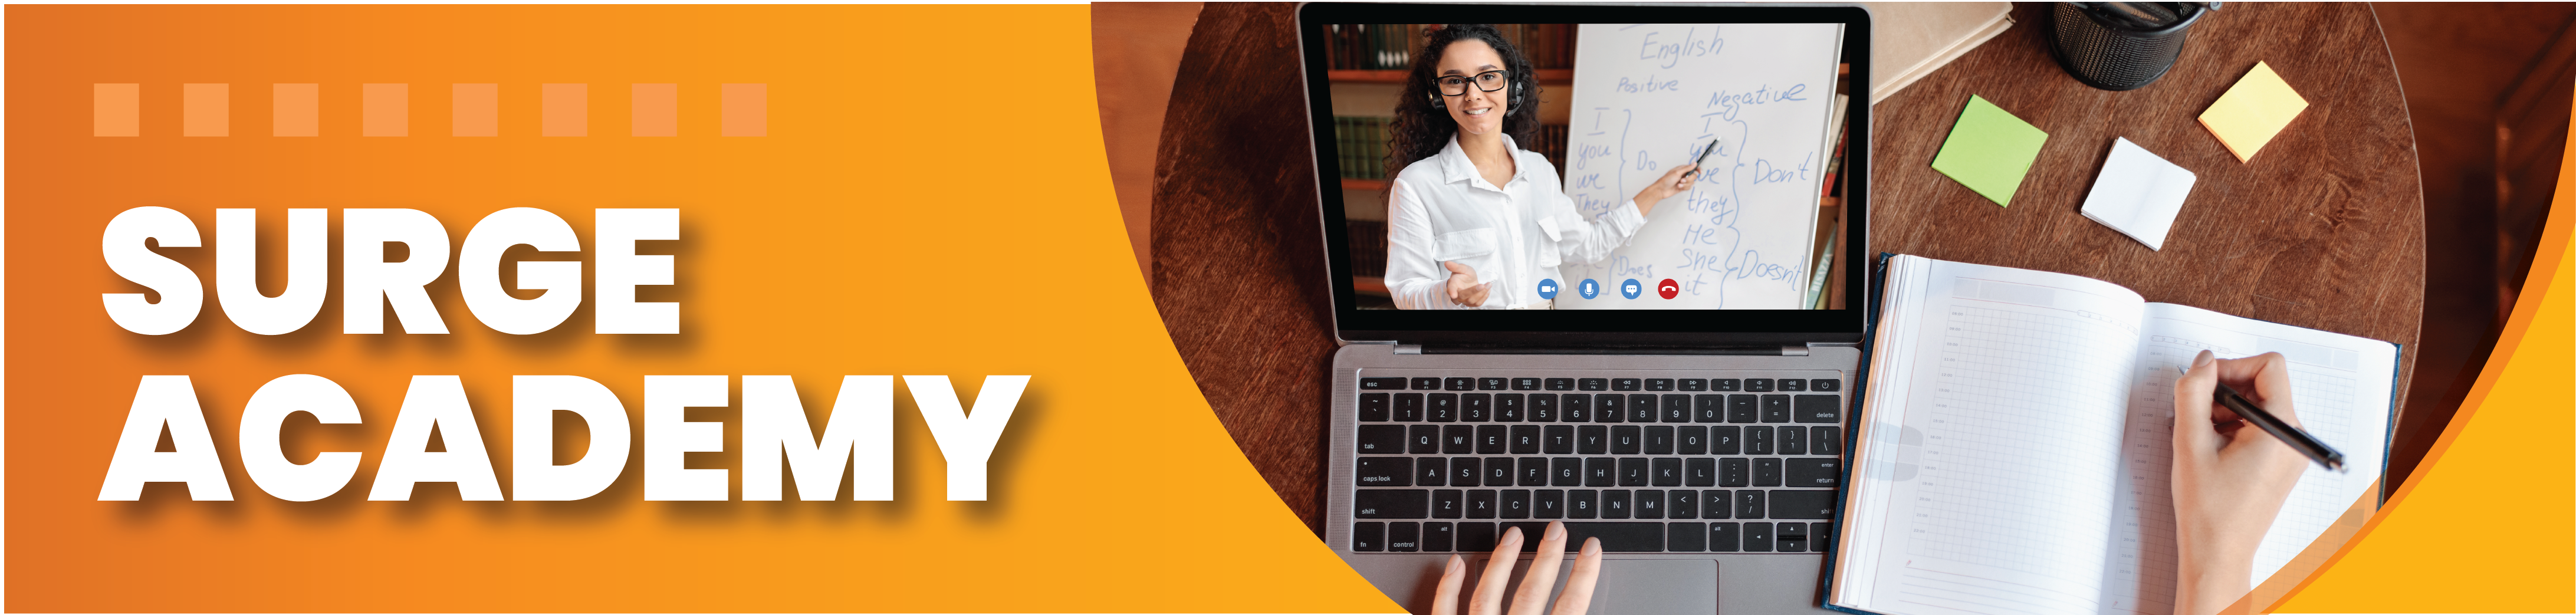 Surge Academy header image with orange background person taking notes watching a online course